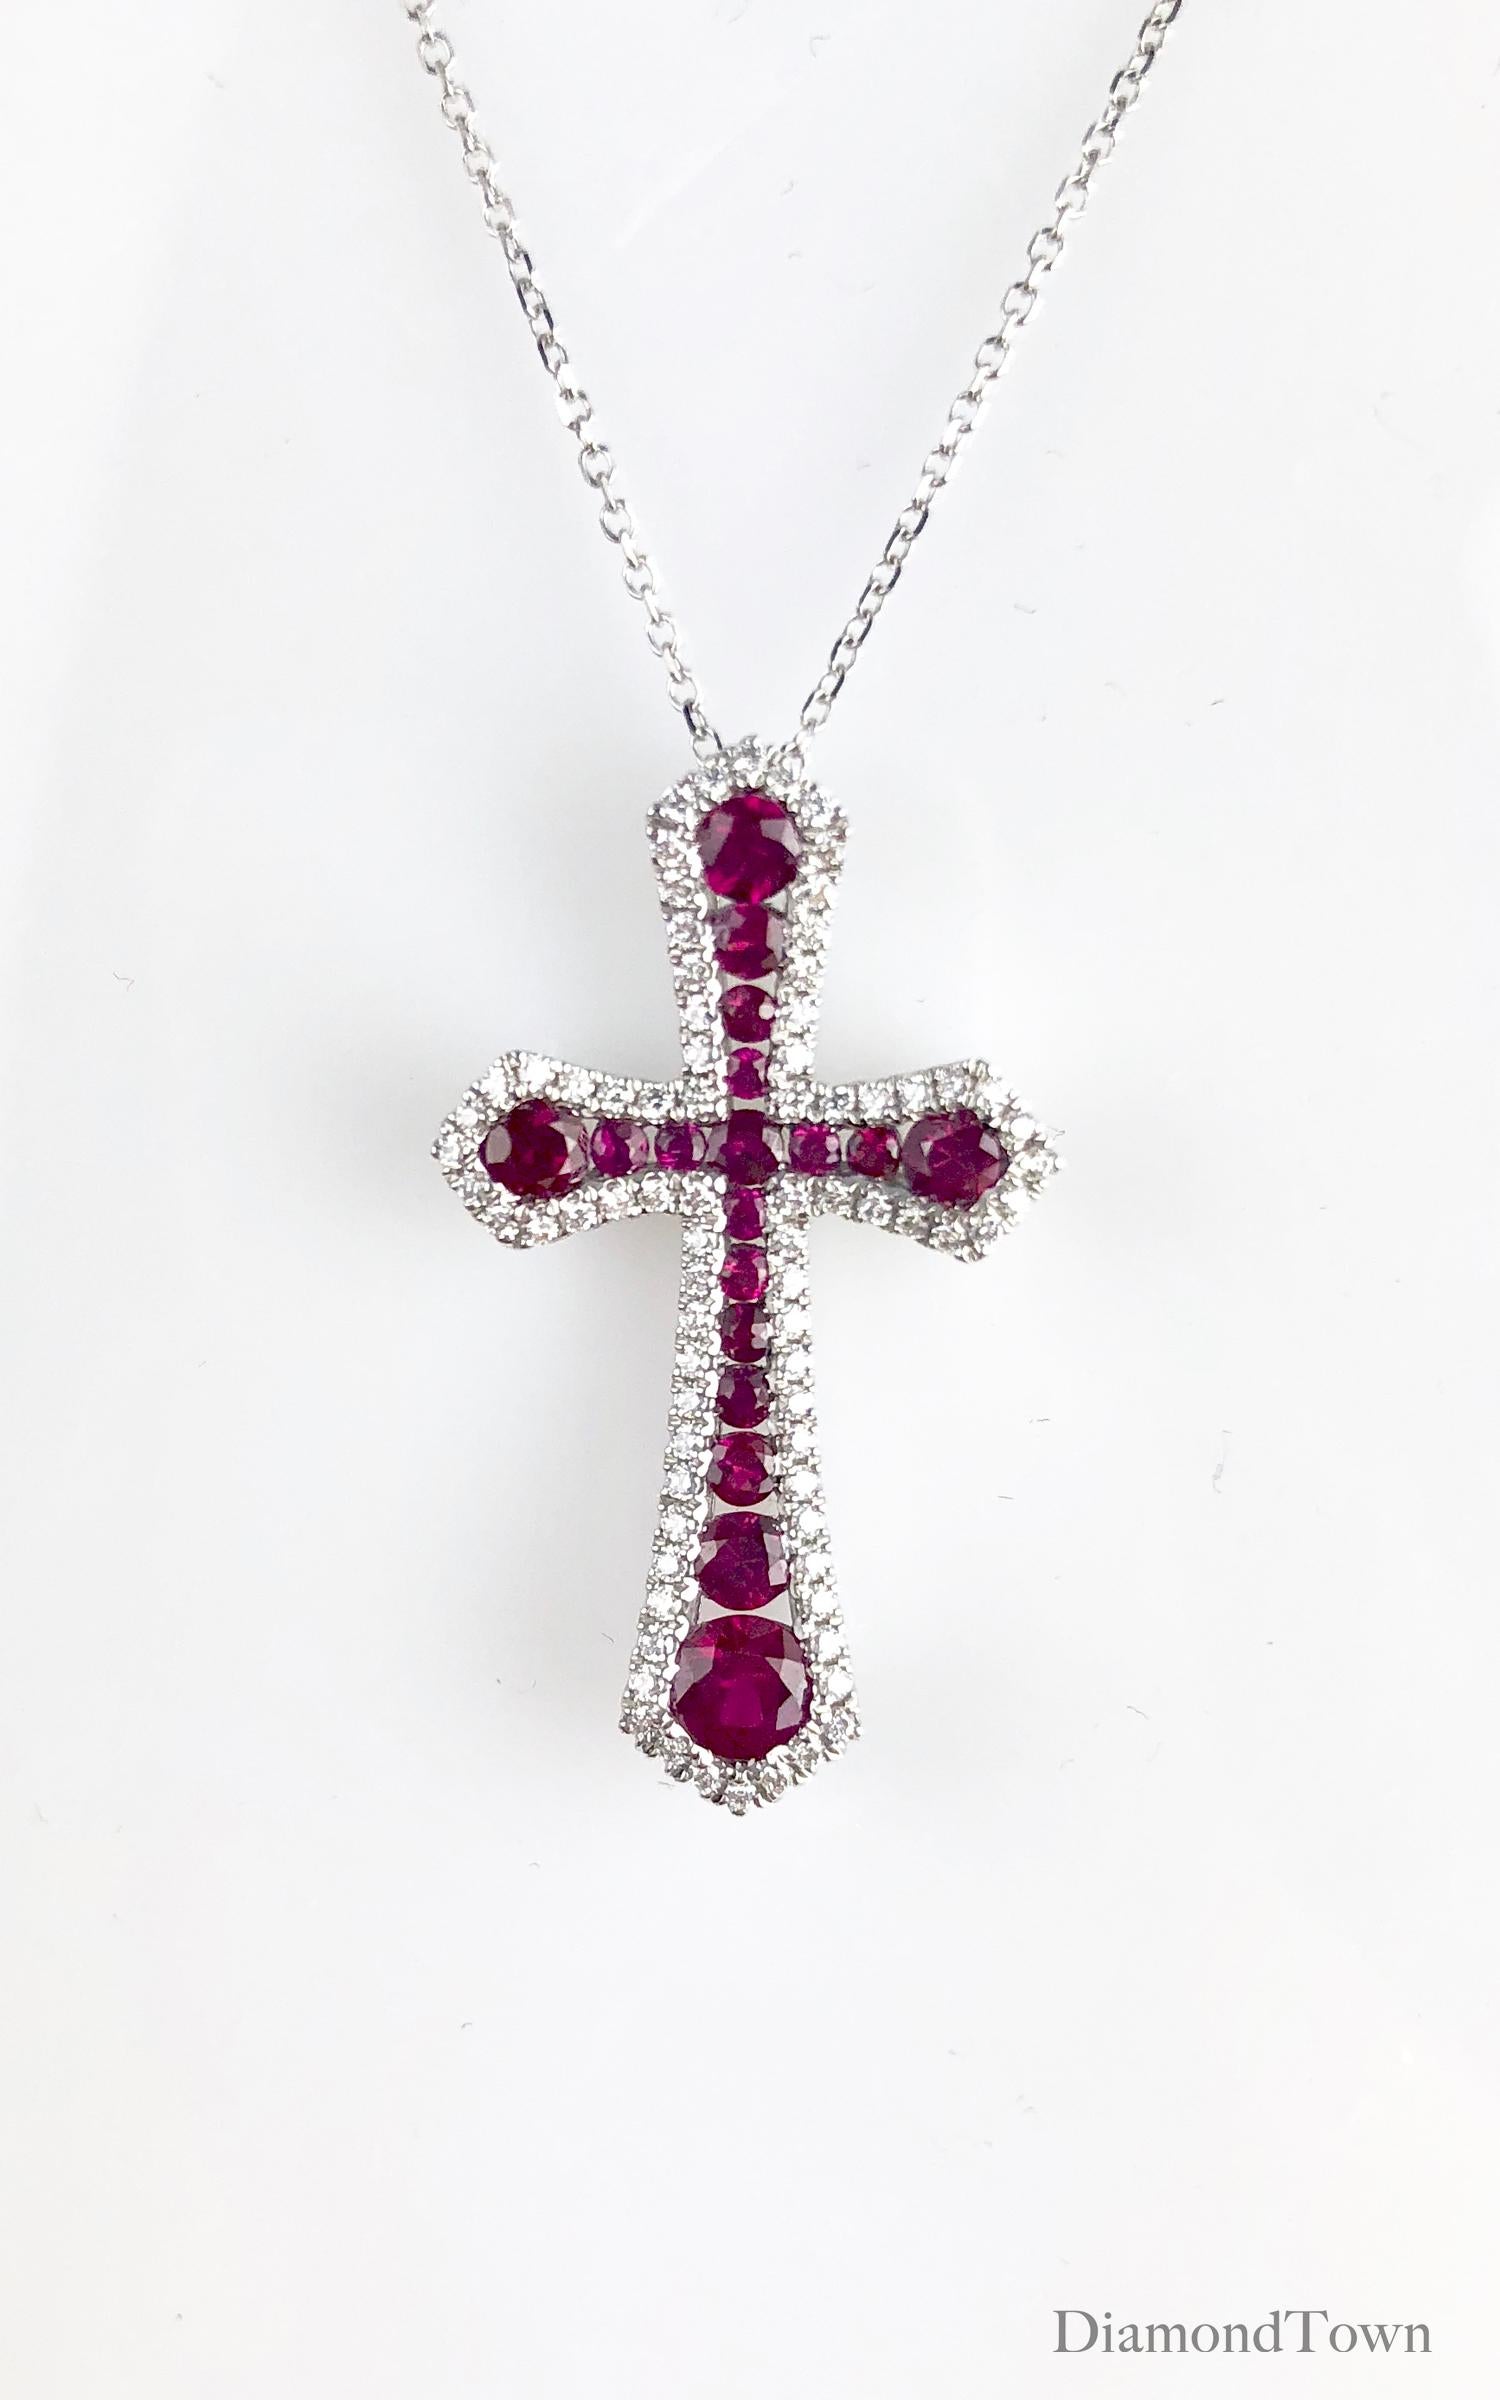 This handcrafted cross pendant has 0.95 carats round rubies surrounded by a halo of round white diamonds. The total diamond weight is 0.27 carats.

Many of our items have matching companion pieces. Please inquire.

An insurance appraisal certificate